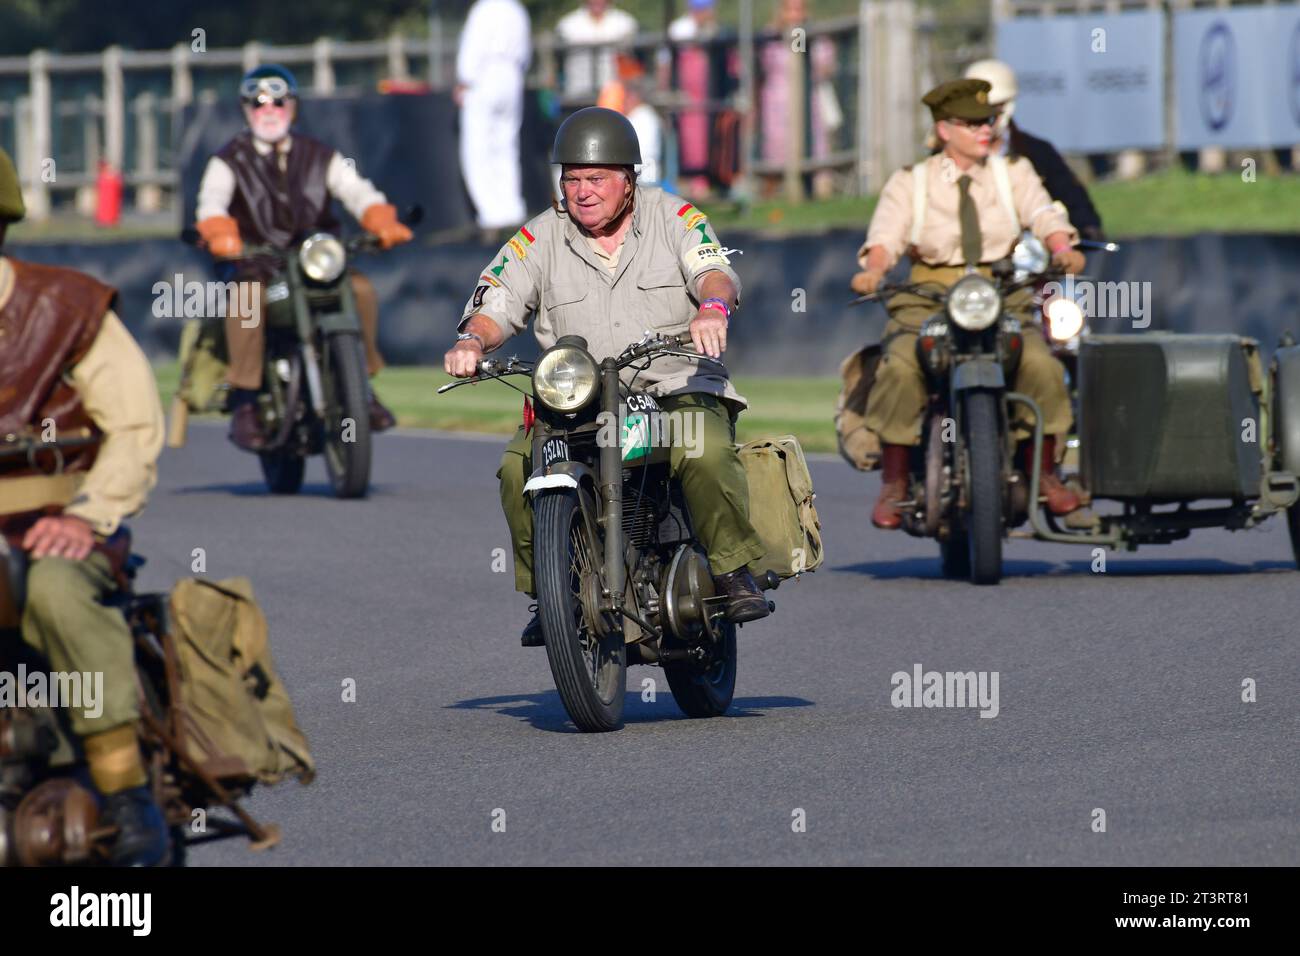 ex-military 1958 Matchless 350cc, Track Parade - Motorcycle Celebration, circa 200 bikes featured in the morning parade laps, including sidecar outfit Stock Photo